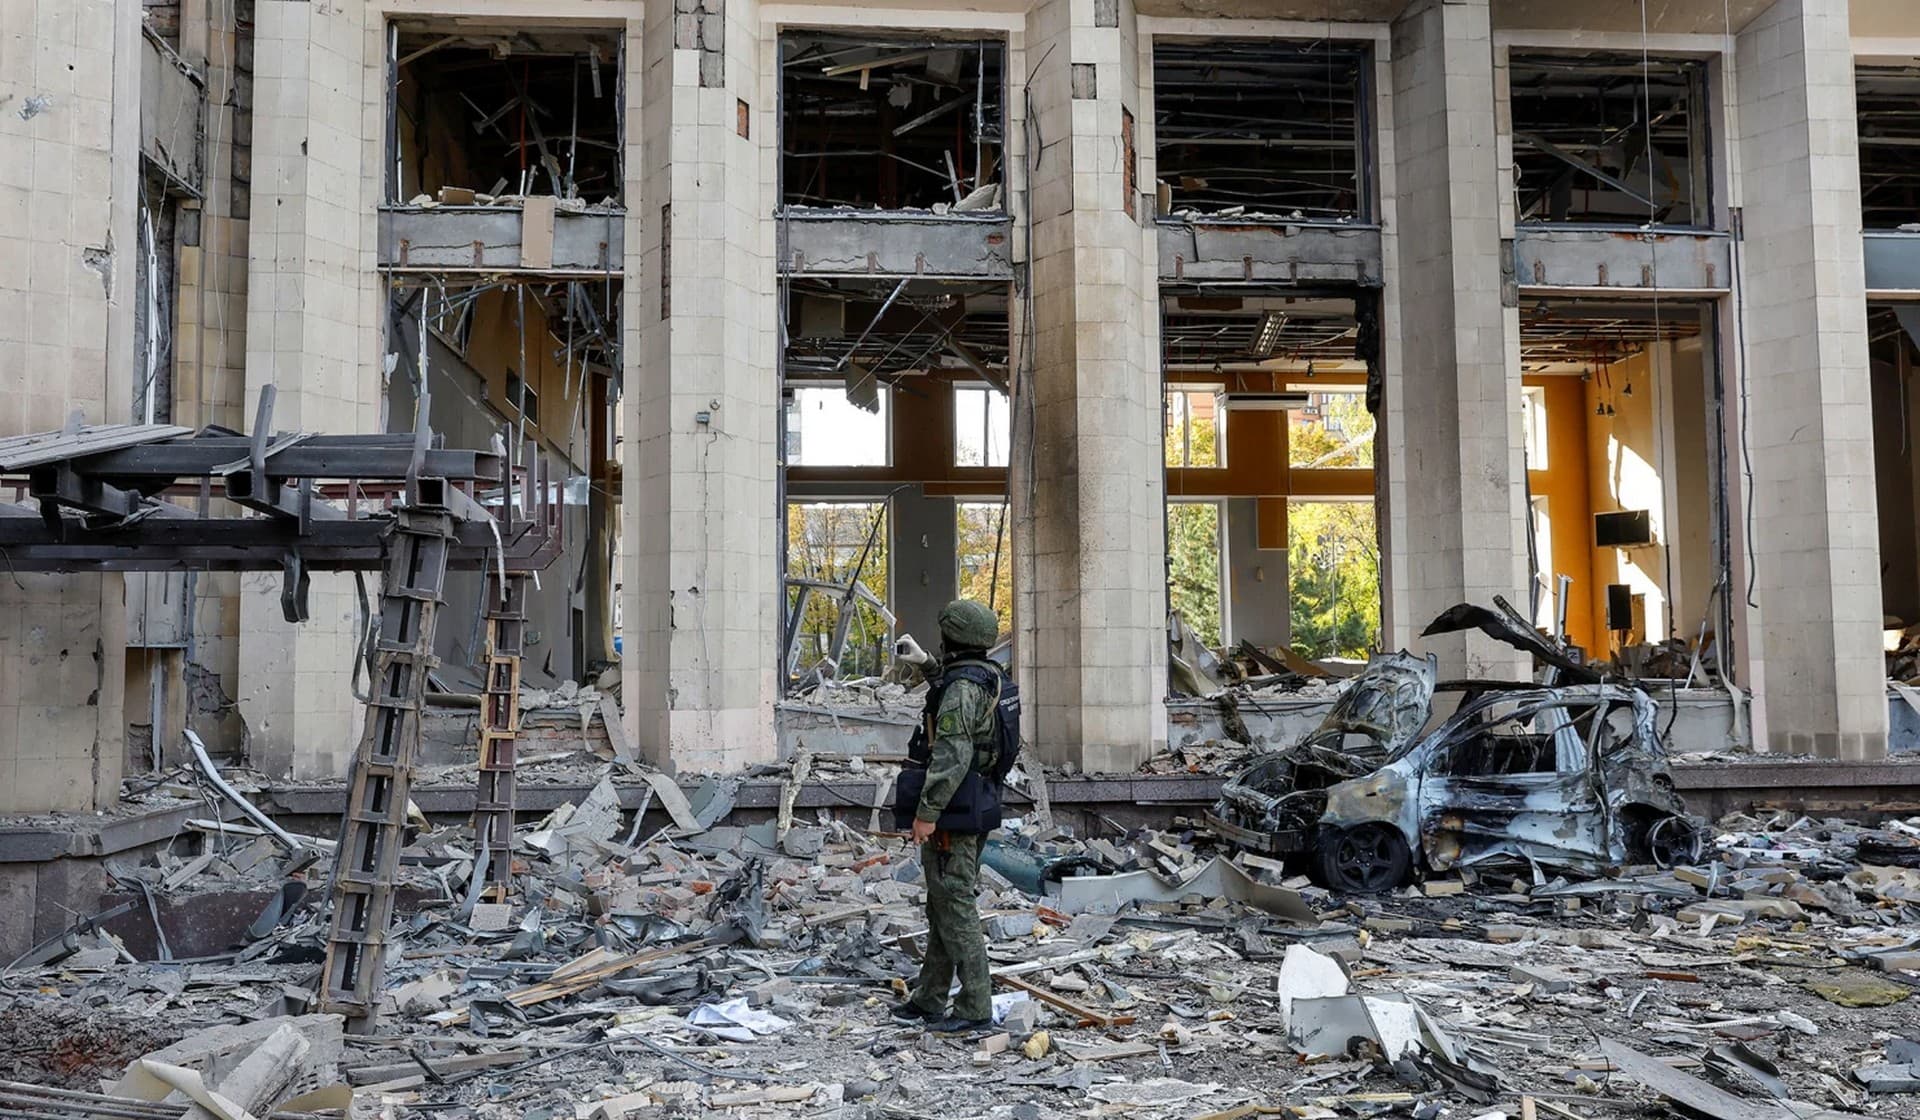 The city administration building hit by recent shelling in Donetsk